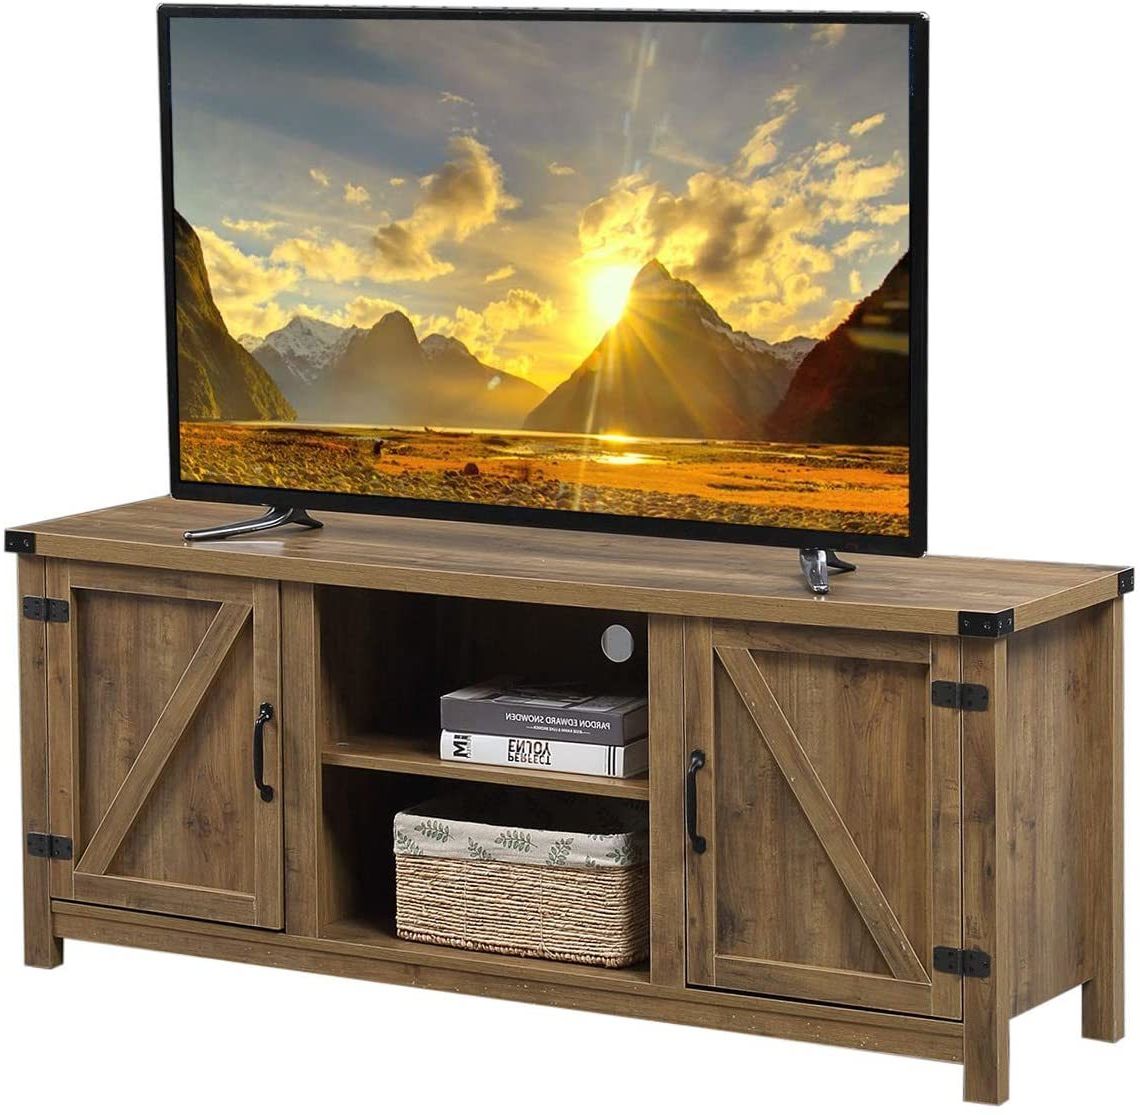 Wooden Tv Stand For Tvs Up To 65 Inches Television, Tv Console Table For 2020 110" Tvs Wood Tv Cabinet With Drawers (View 13 of 15)